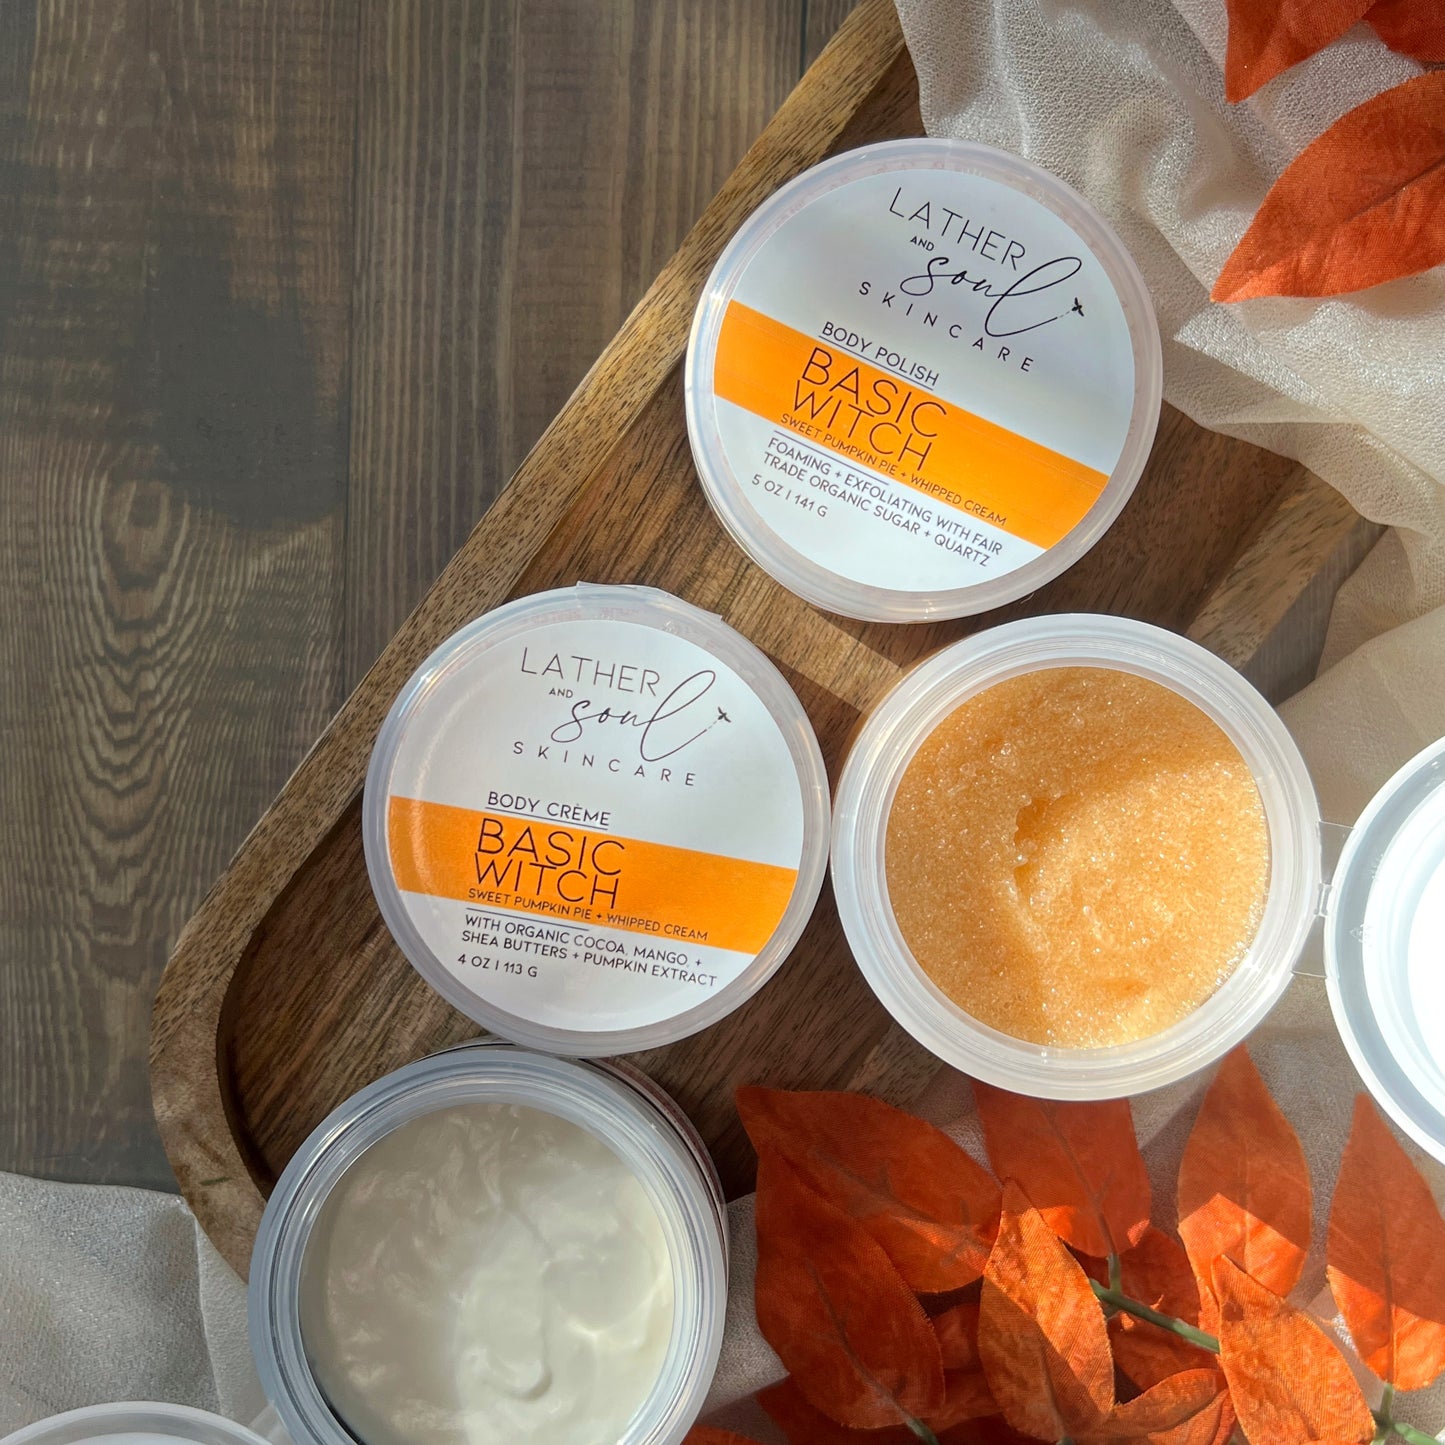 The Basic Witch collection of body care from Lather and Soul